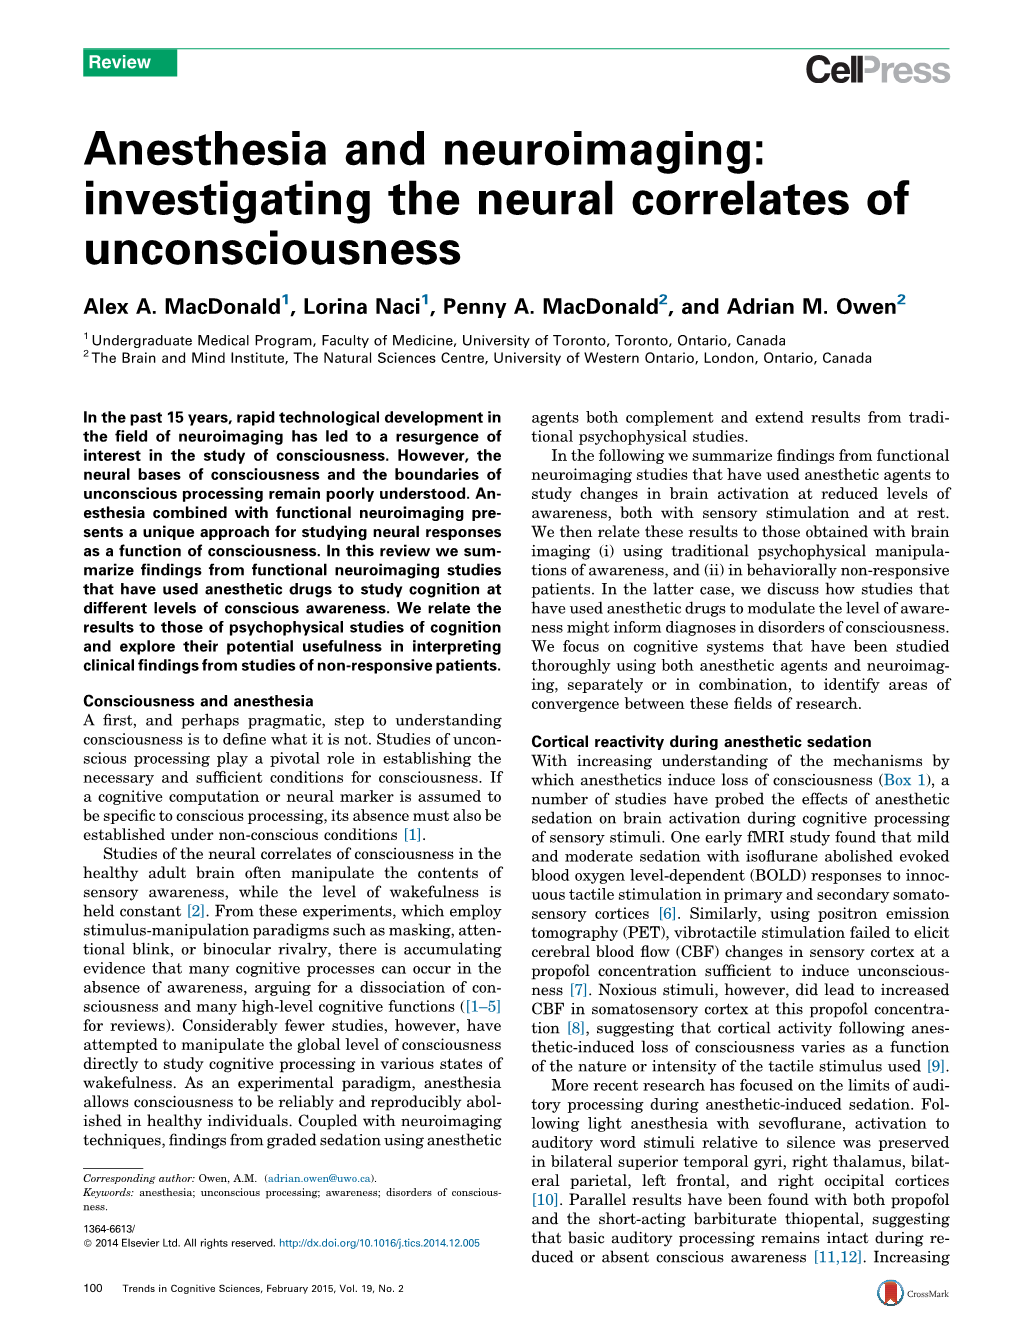 Anesthesia and Neuroimaging: Investigating the Neural Correlates